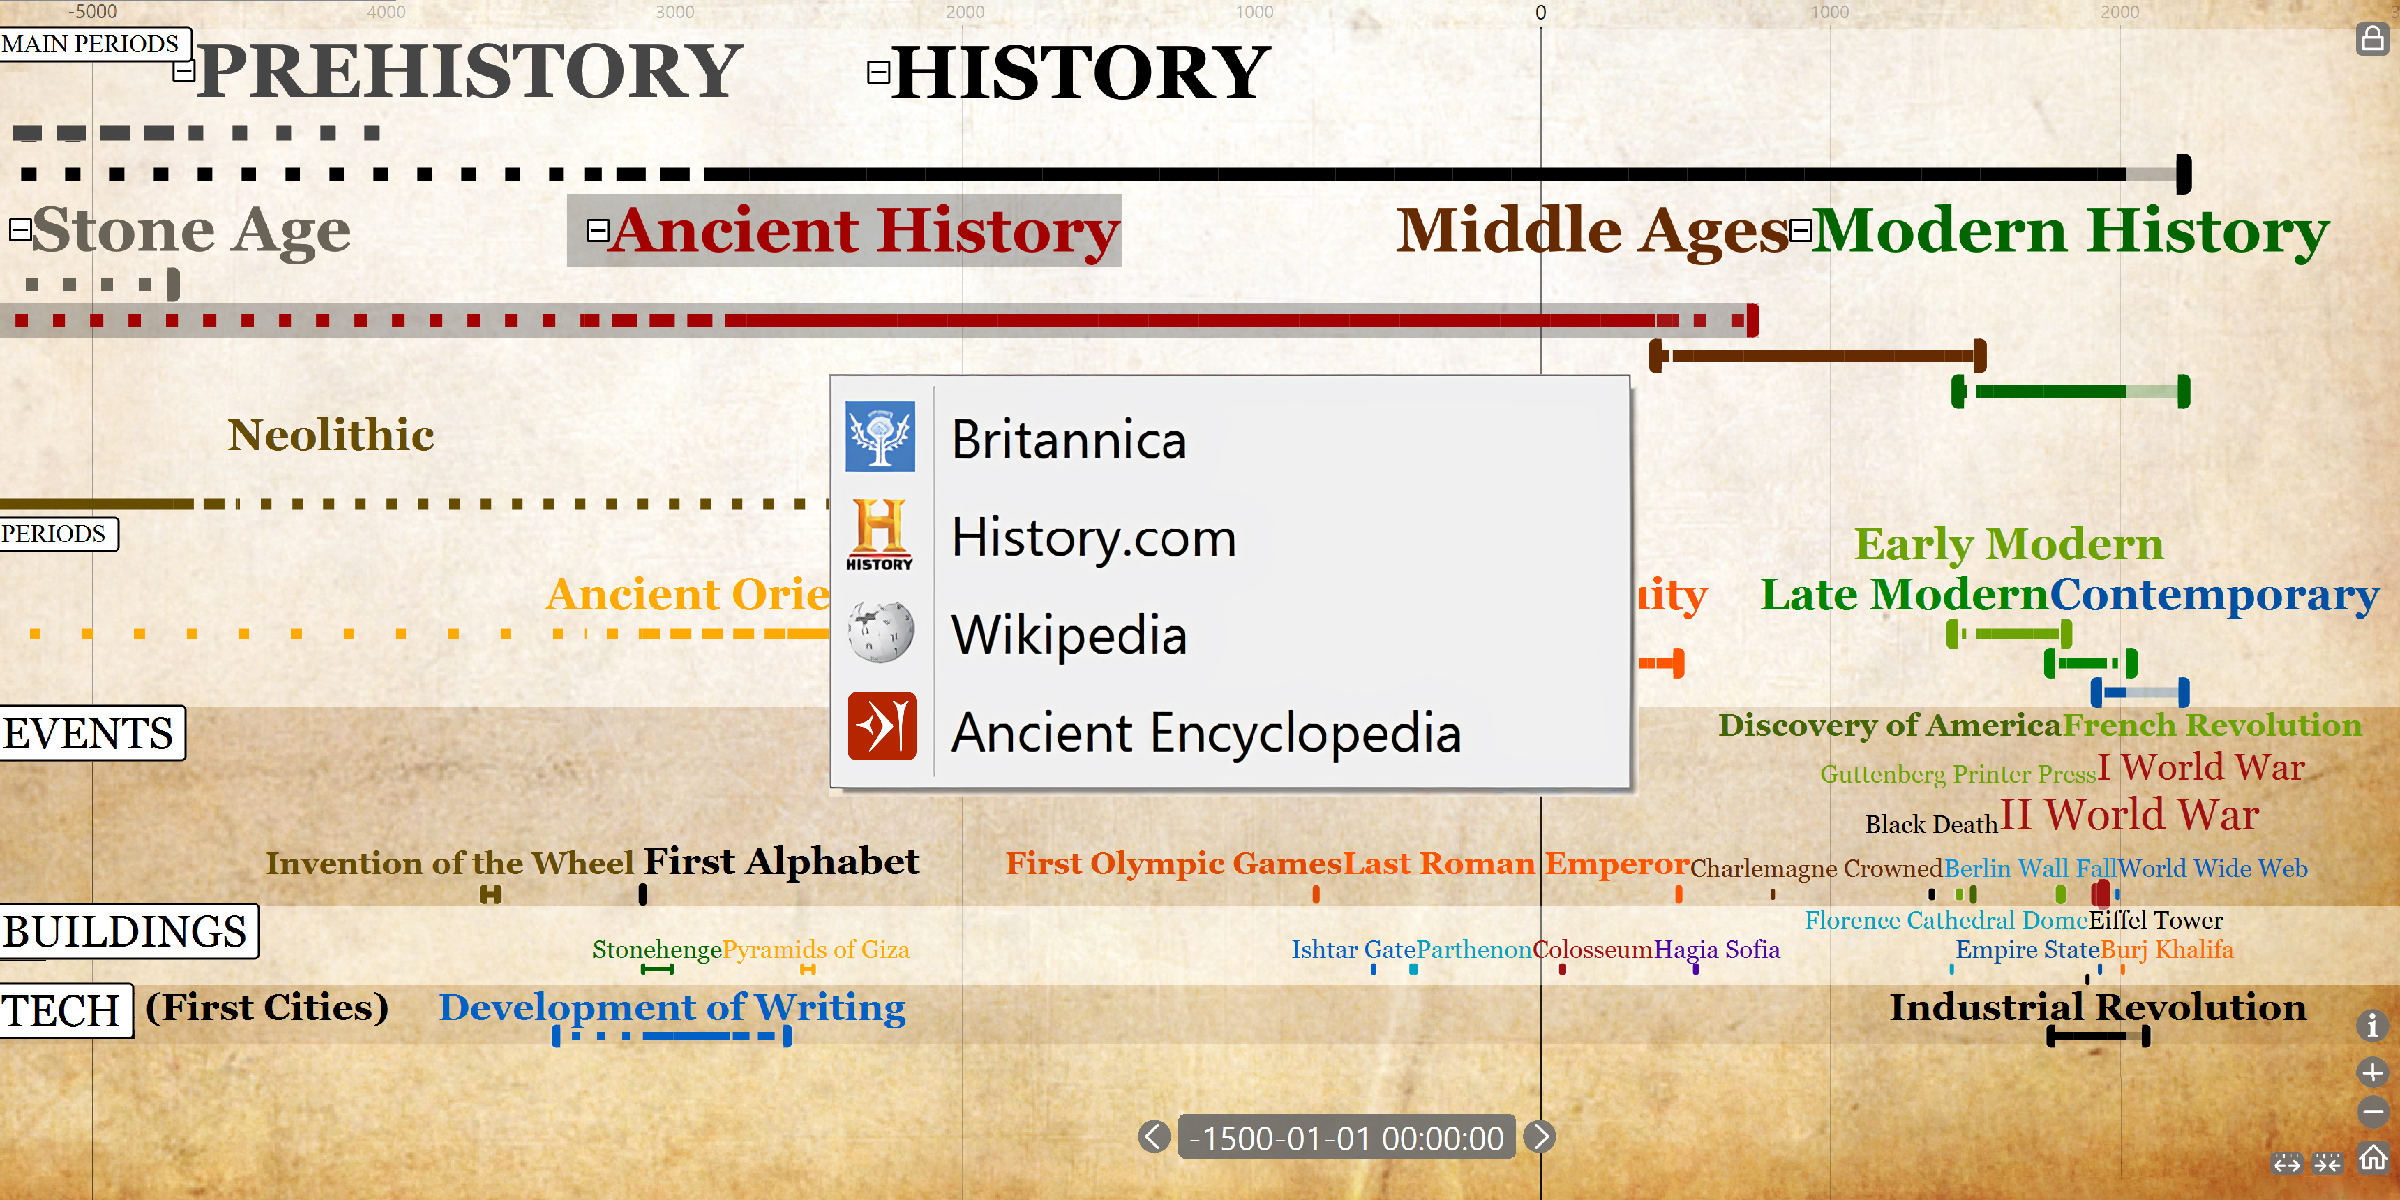 Timeline of Prehistory, Ancient History, Middle Ages and Modern History with buil-in encyclopedia access